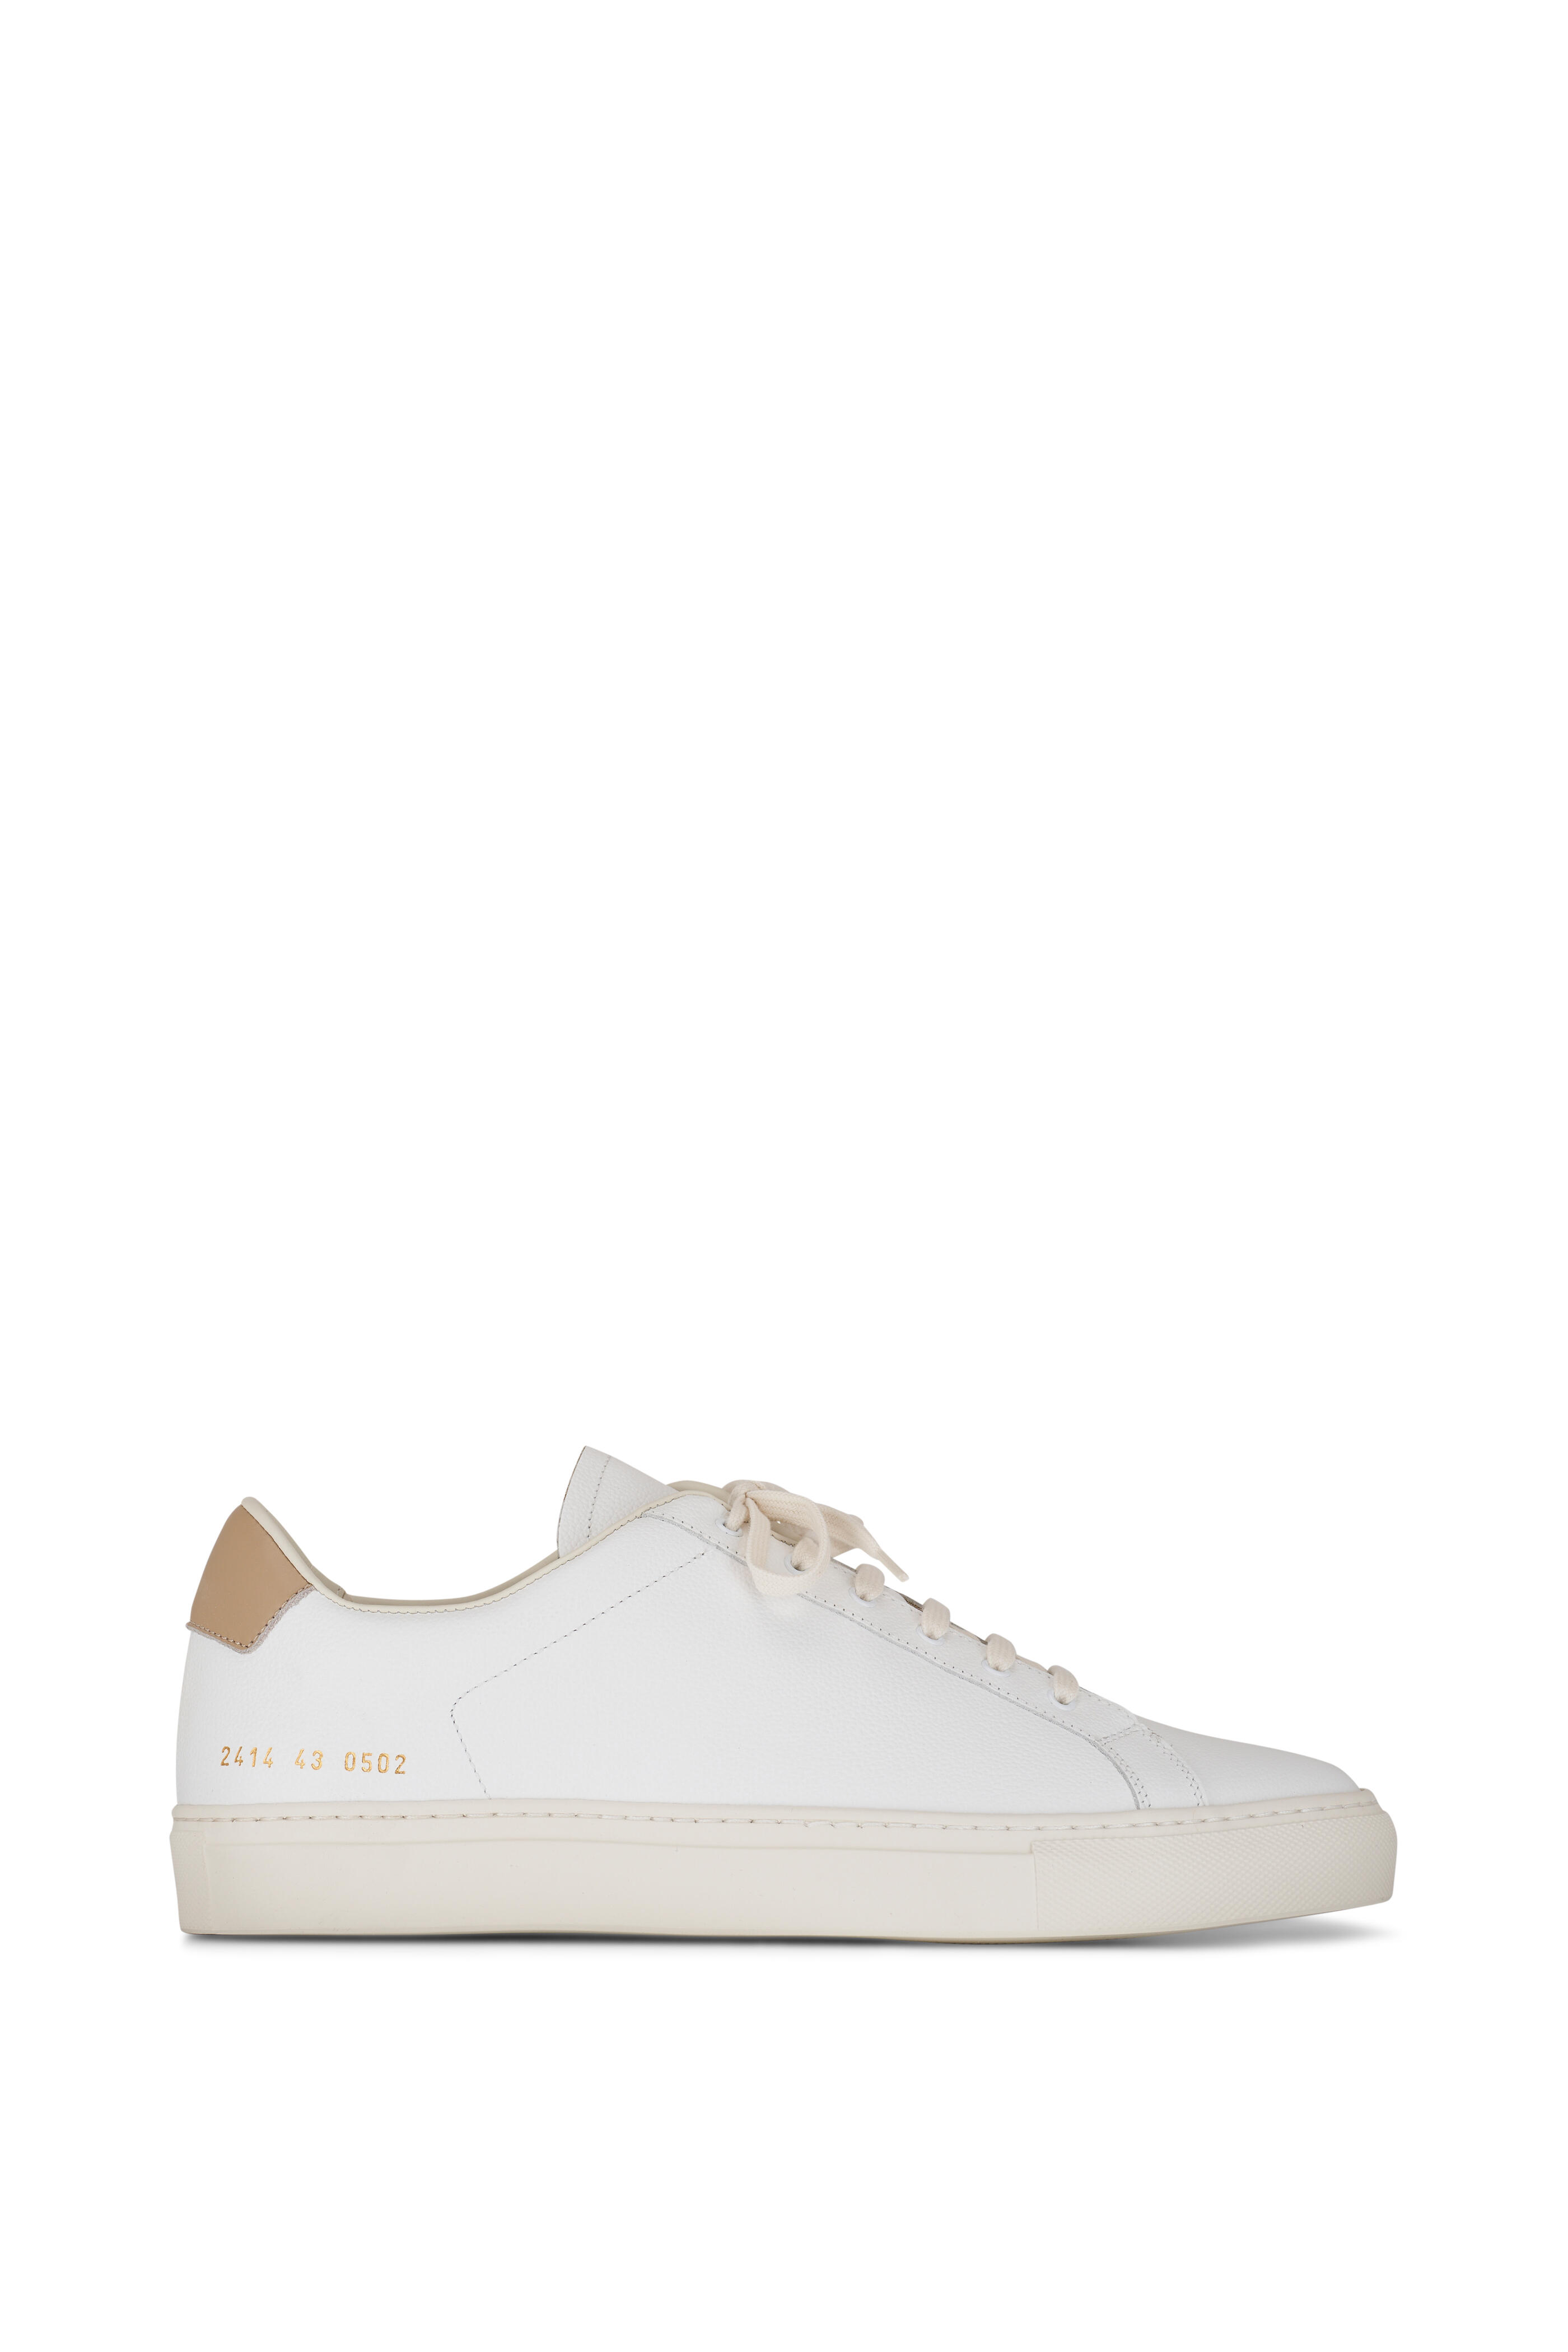 Common Projects - Retro Bumpy White & Tan Leather Low Top Sneaker